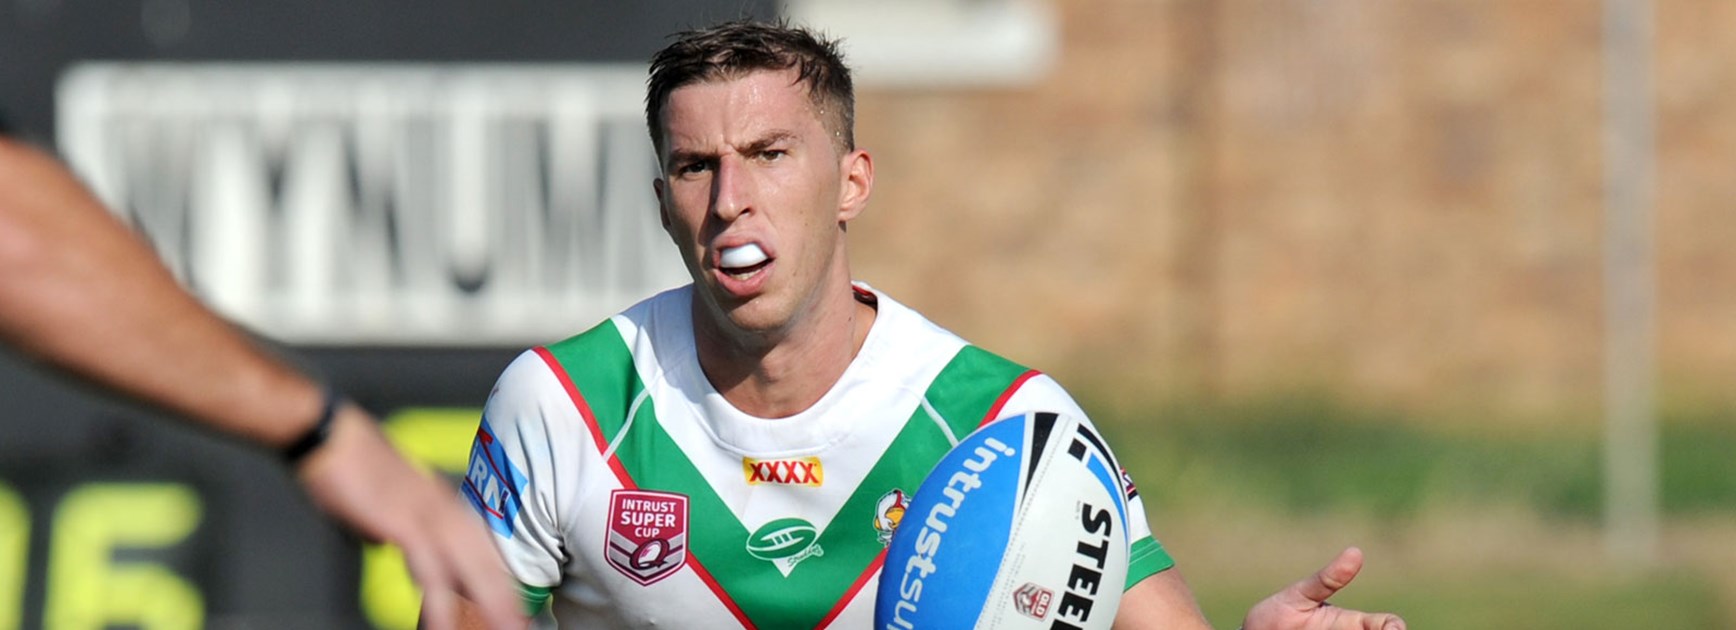 Wynnum Manly's Patrick Templeman has won the 2015 Courier-Mail Medal.